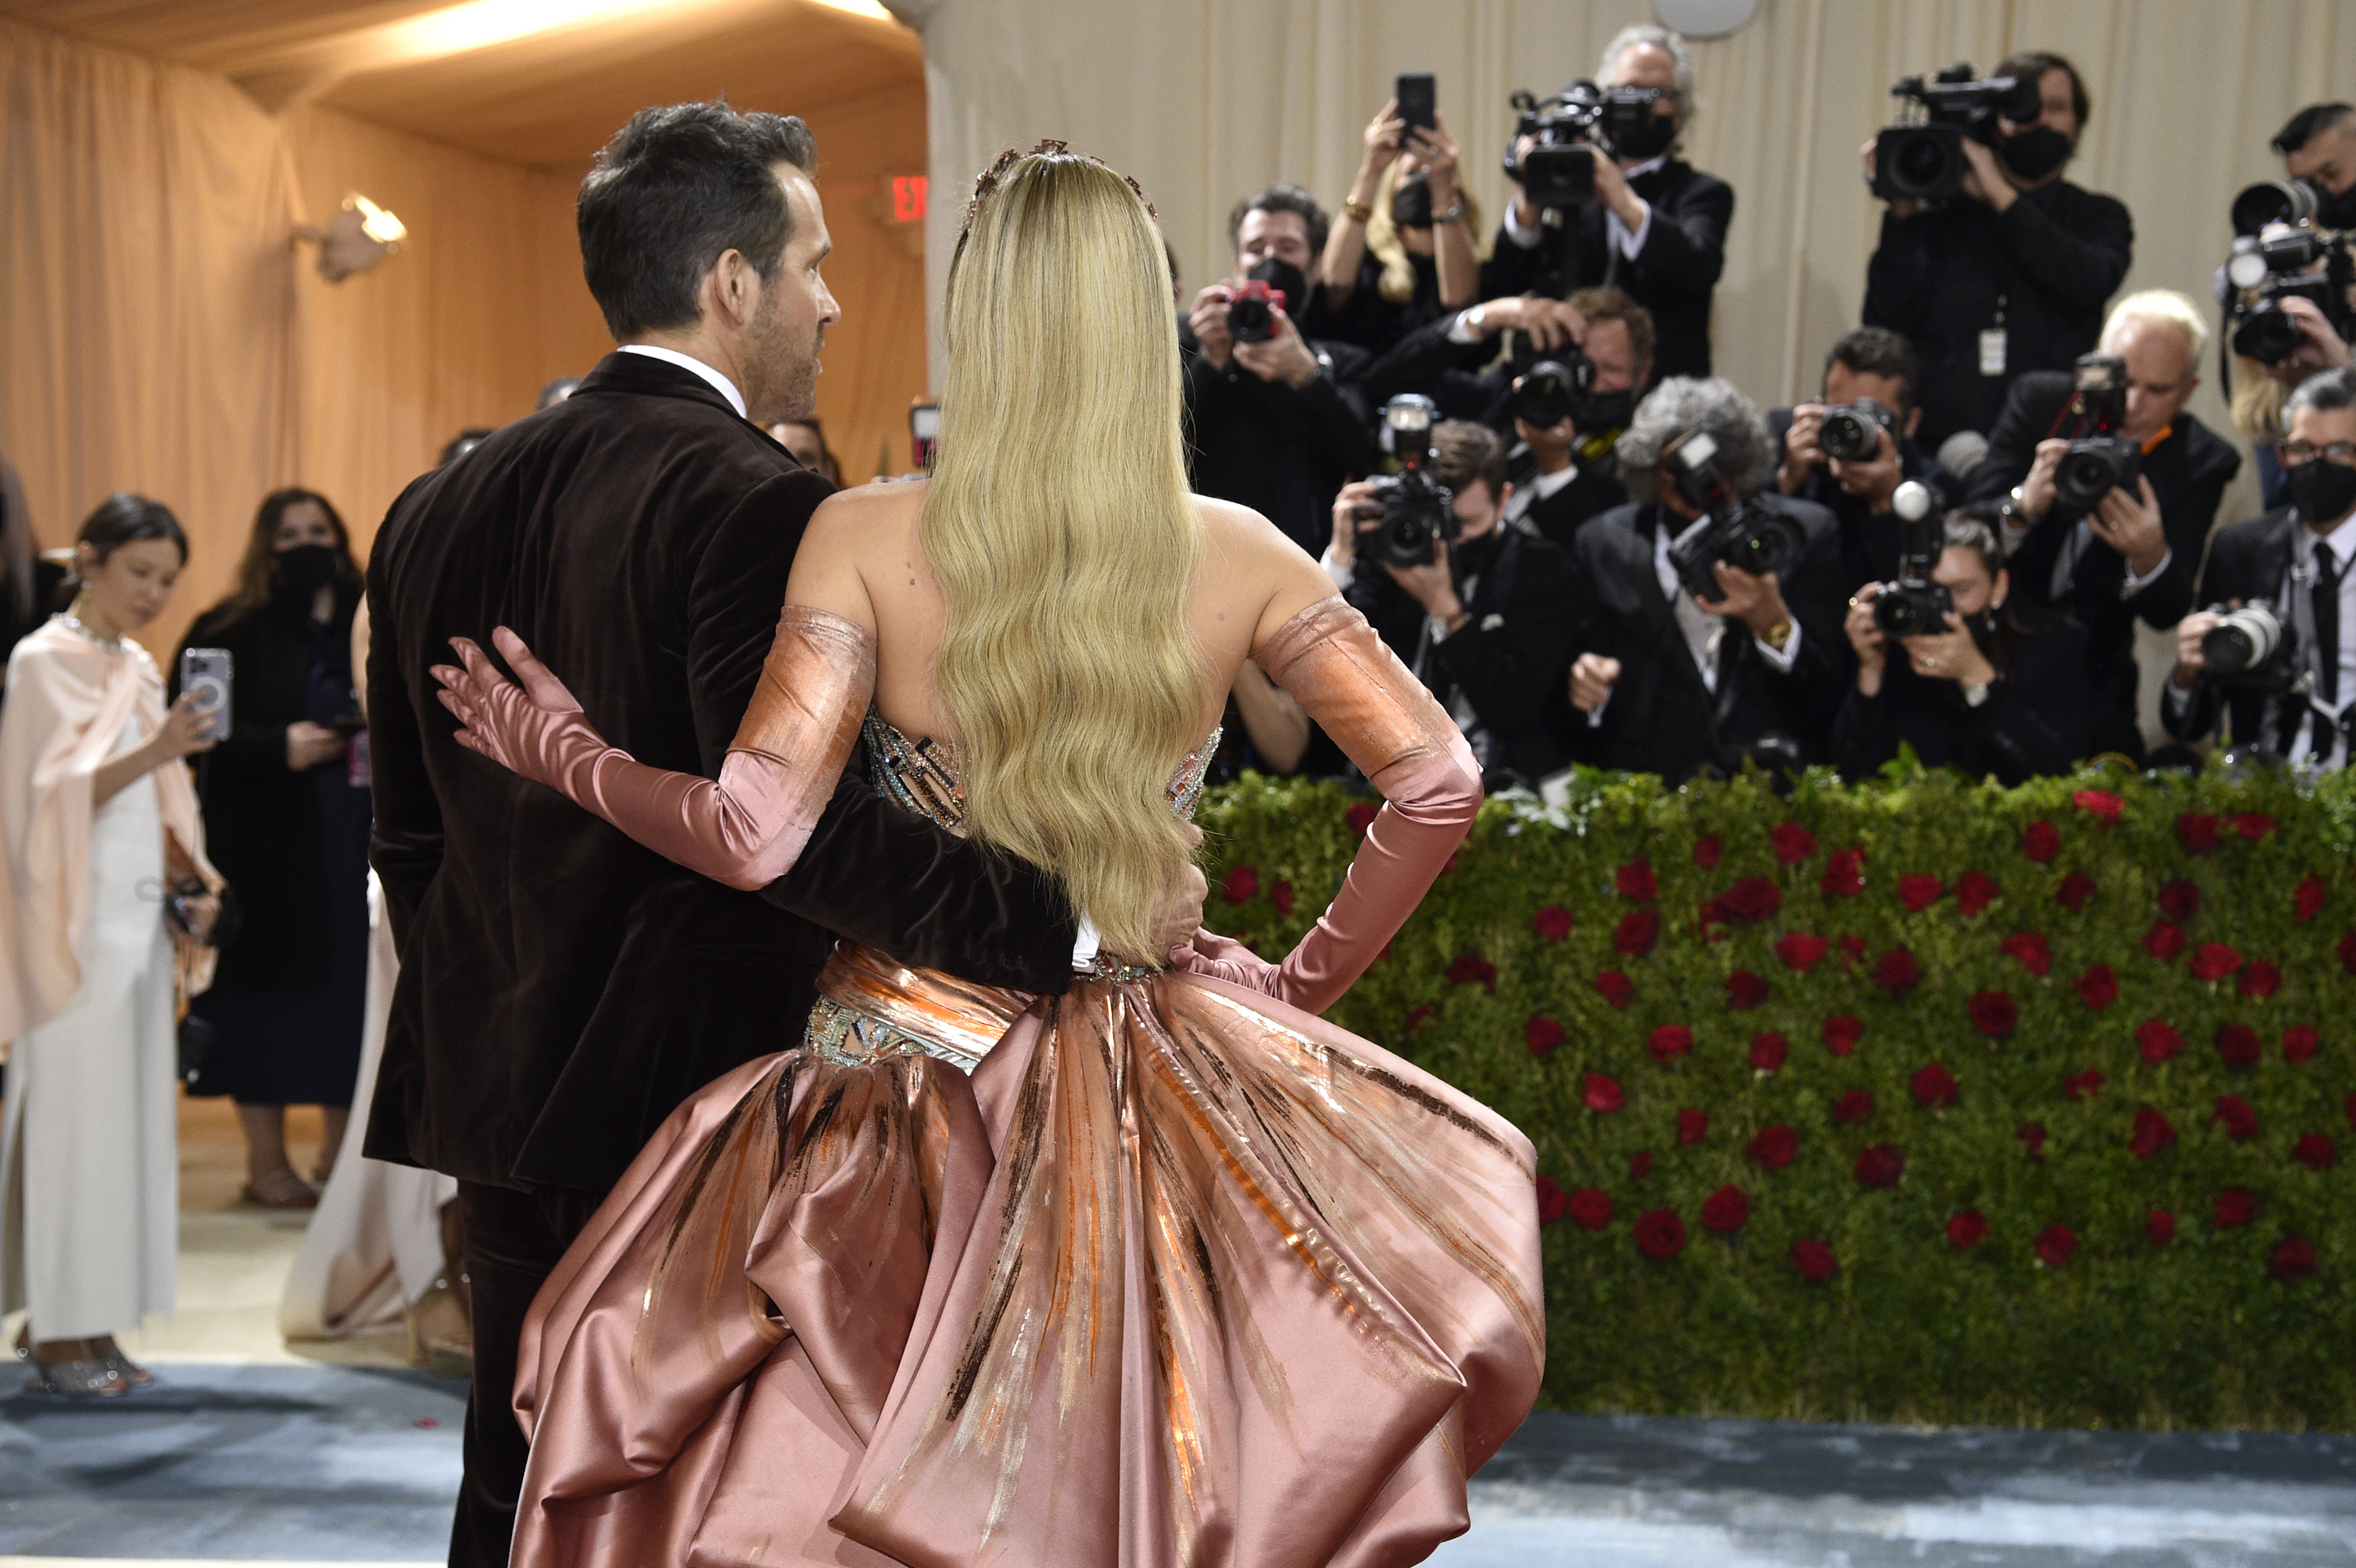 Met Gala 2022: The theme, date and everything you need to know